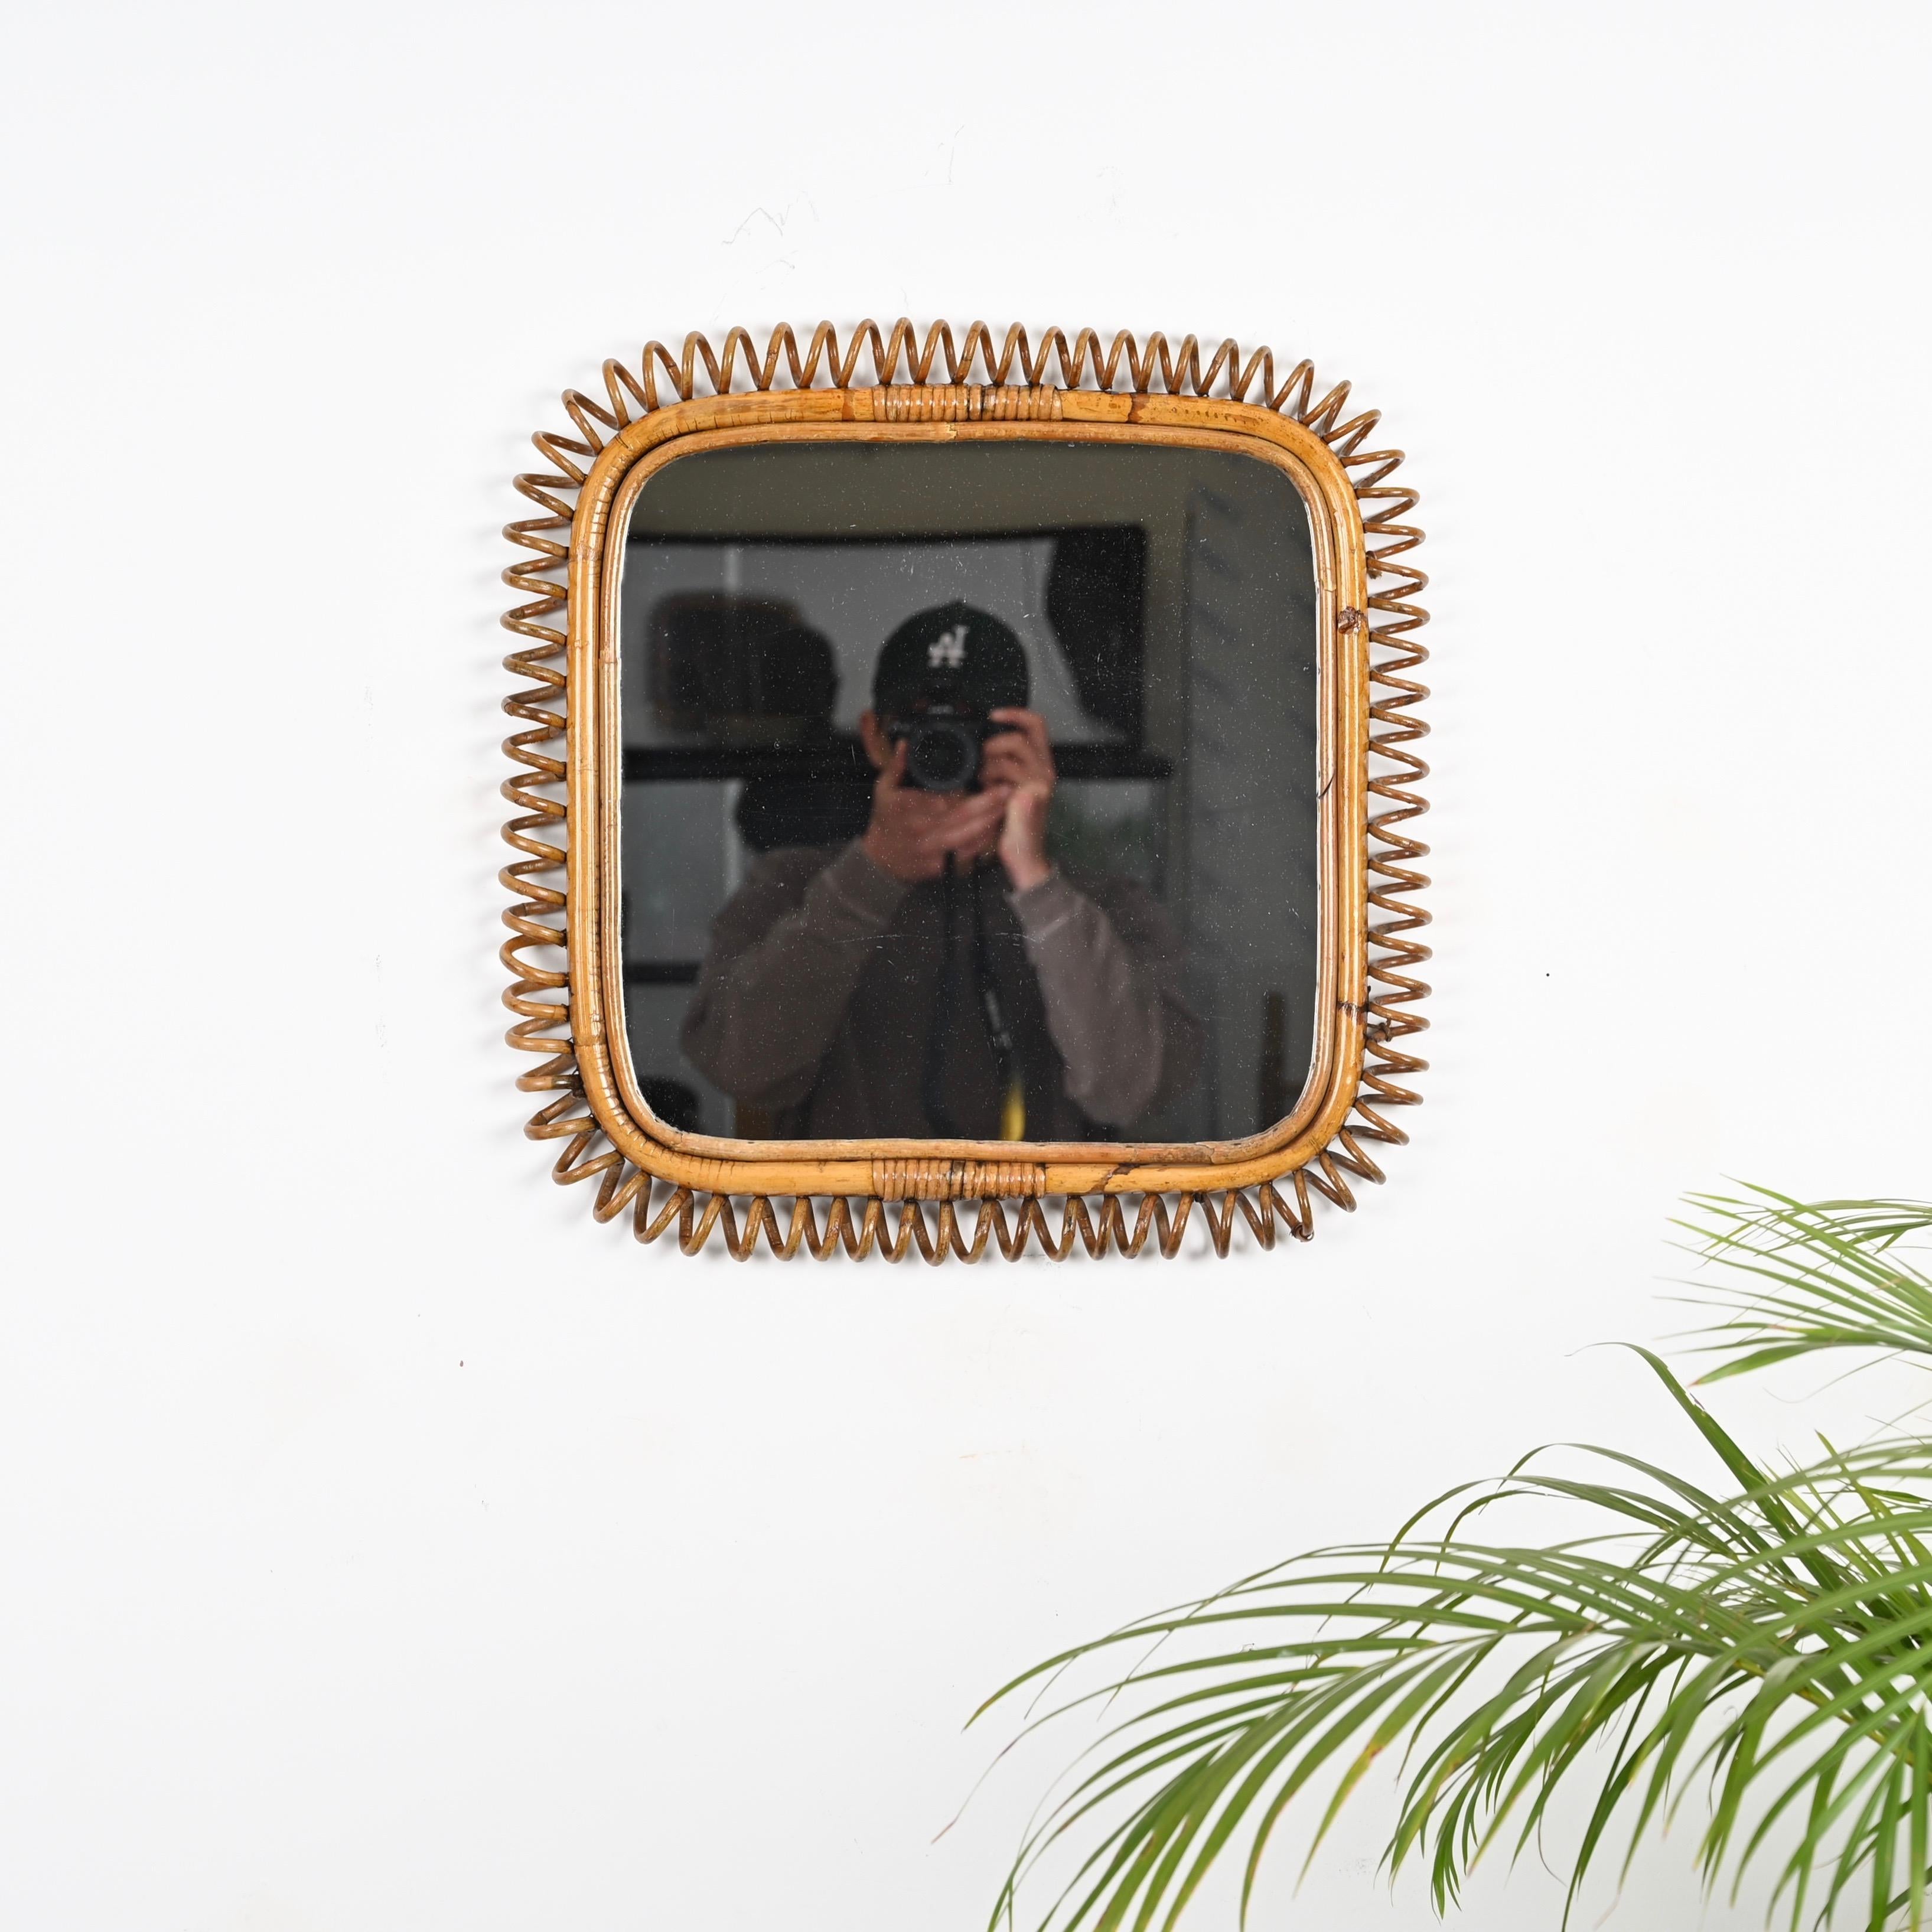 Spectacular Mid-Century Cote d'Azur square mirror fully made in bamboo, curved rattan  and wicker. This unique mirror was made in Italy during the 1960s.

This amazing mirror is fully handcrafted with a square-shaped frame in curved bamboo which is